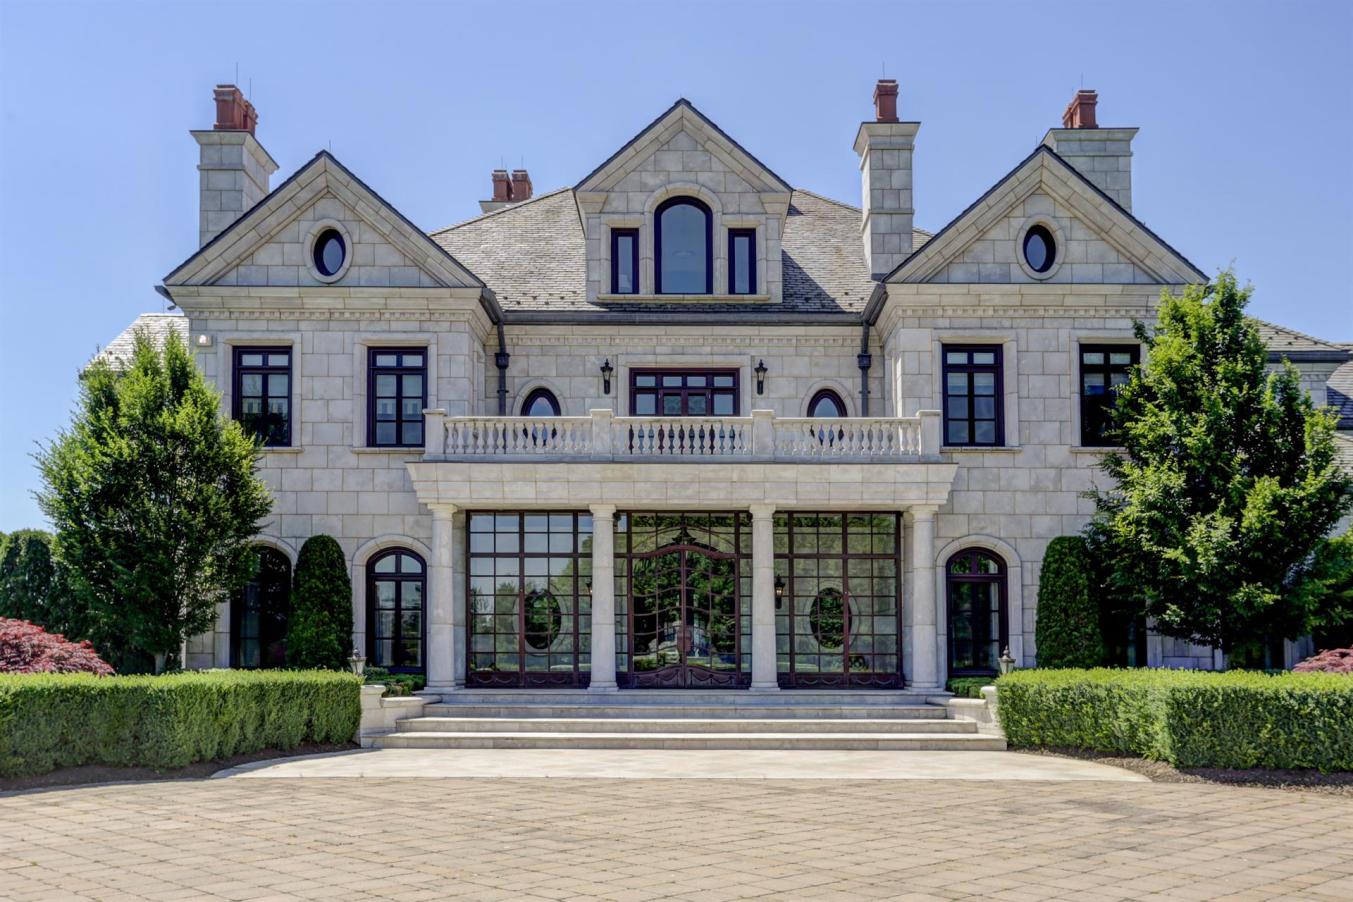 What Are The Most Expensive Celebrity Homes And Mansions?